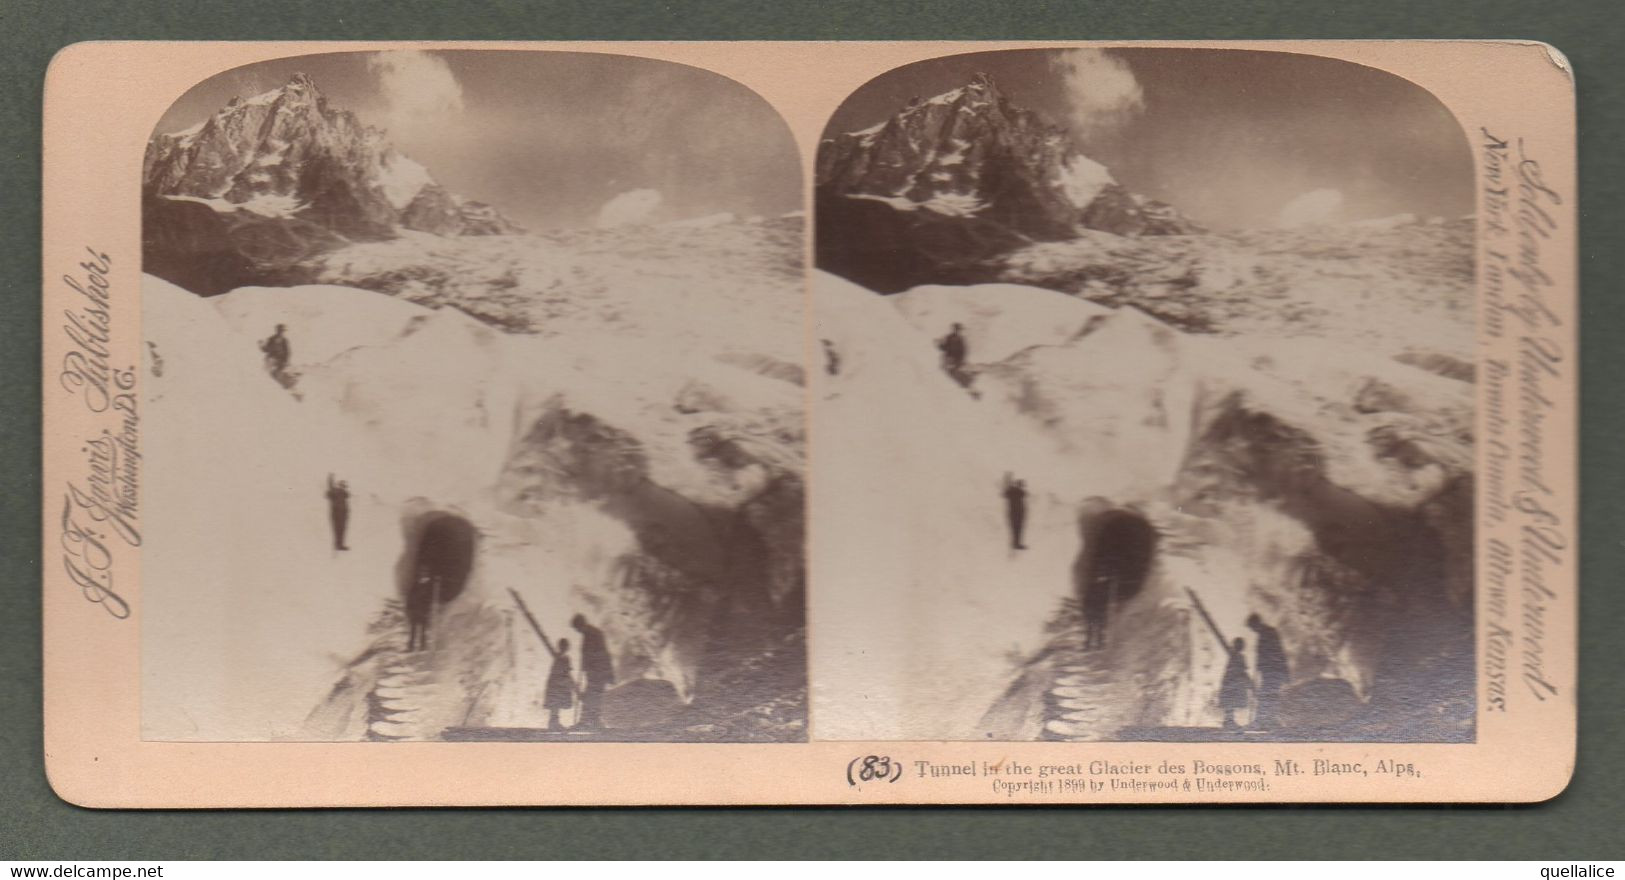 02157 "83-TUNNEL IN THE GREAT GLACER DES BOSSONS-MT. BLANC-ALPE-1899" STEREOSCOPICA ORIG. - Stereoscopische Kaarten